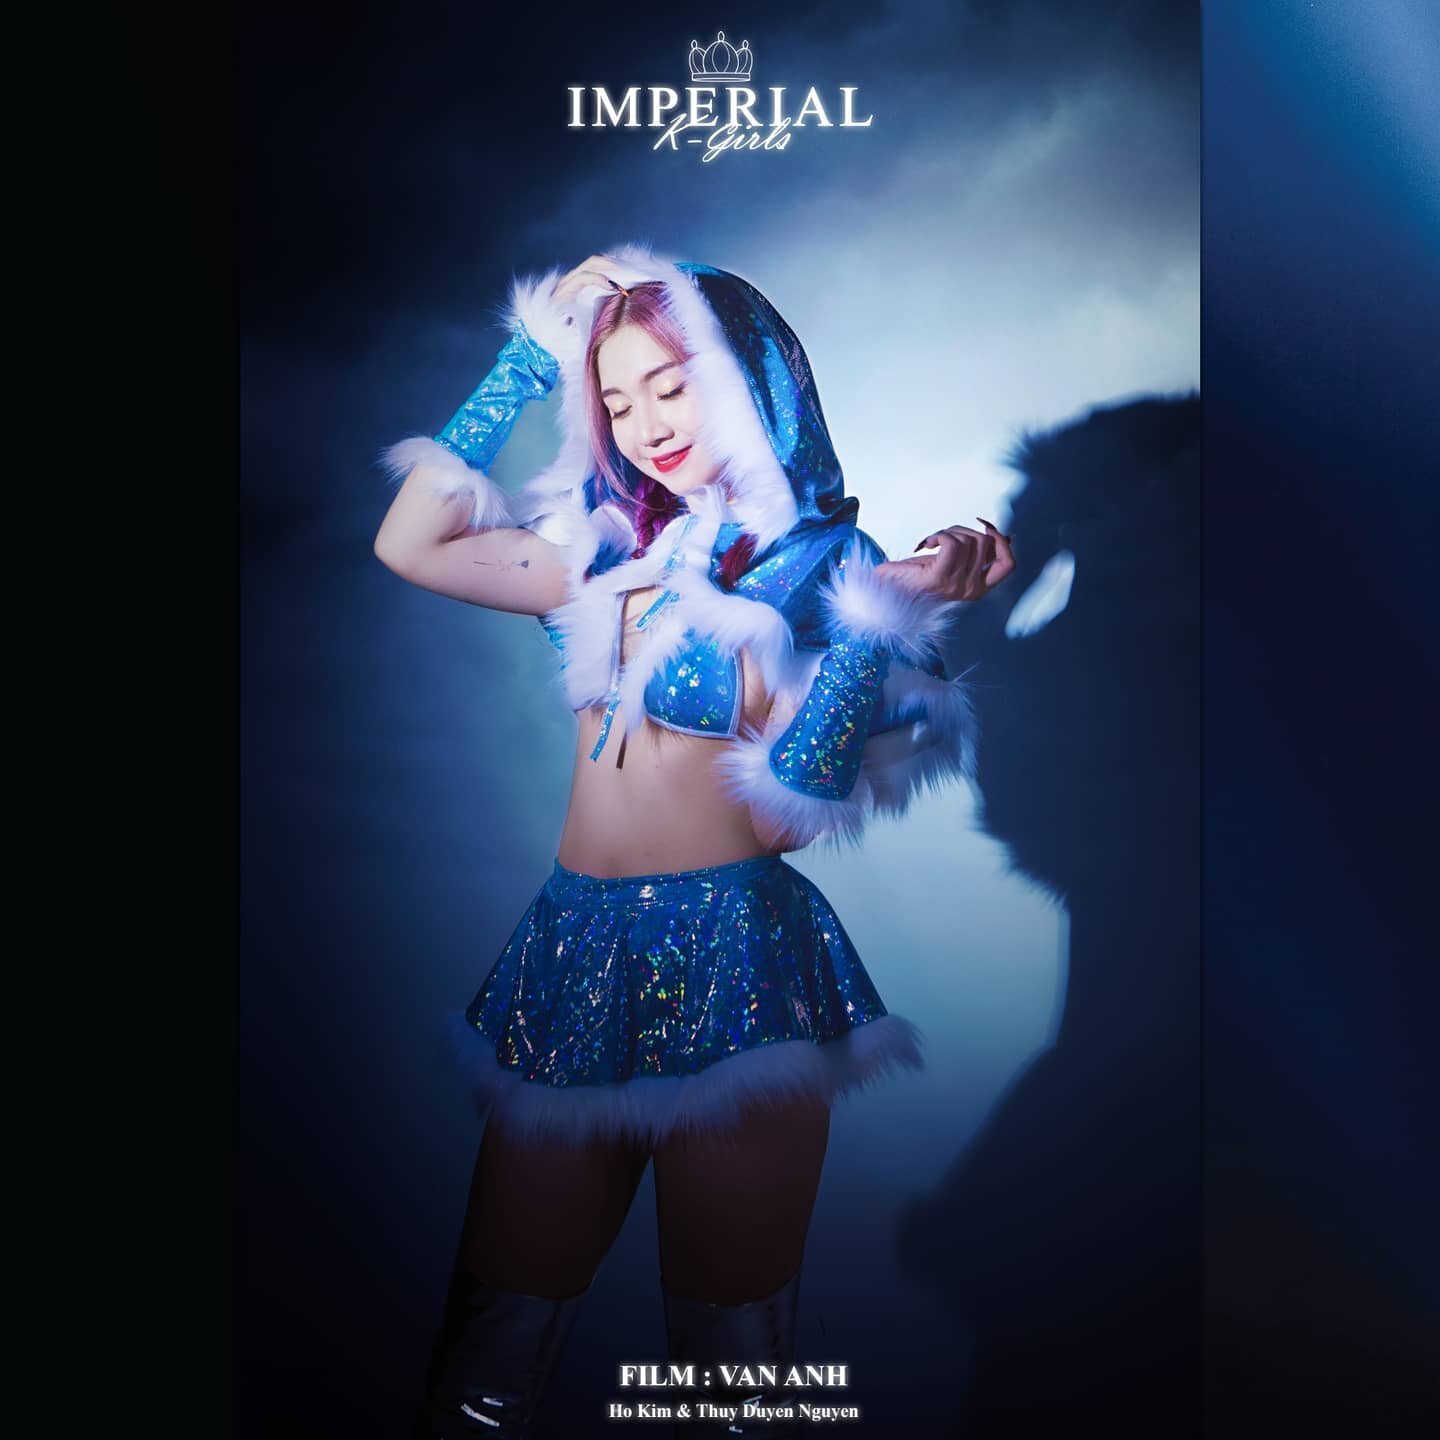 BABY : @reveuseamedealice
Feat. Imperial K-Girls
by @by.hokim &amp; @thelookbookedition
.
#KTeam #KGirls #Kboys #ImperialKGirls
#hcmc #dancer #illusionstudio 
.
❤&nbsp; 𝗖𝗼𝗻𝘁𝗮𝗰𝘁 𝗳𝗼𝗿 𝘄𝗼𝗿𝗸
𝗛𝗢𝗧𝗟𝗜𝗡𝗘 : 𝘮𝘴. 𝘒𝘢𝘮𝘪 0931 421 421 
𝗠𝗔